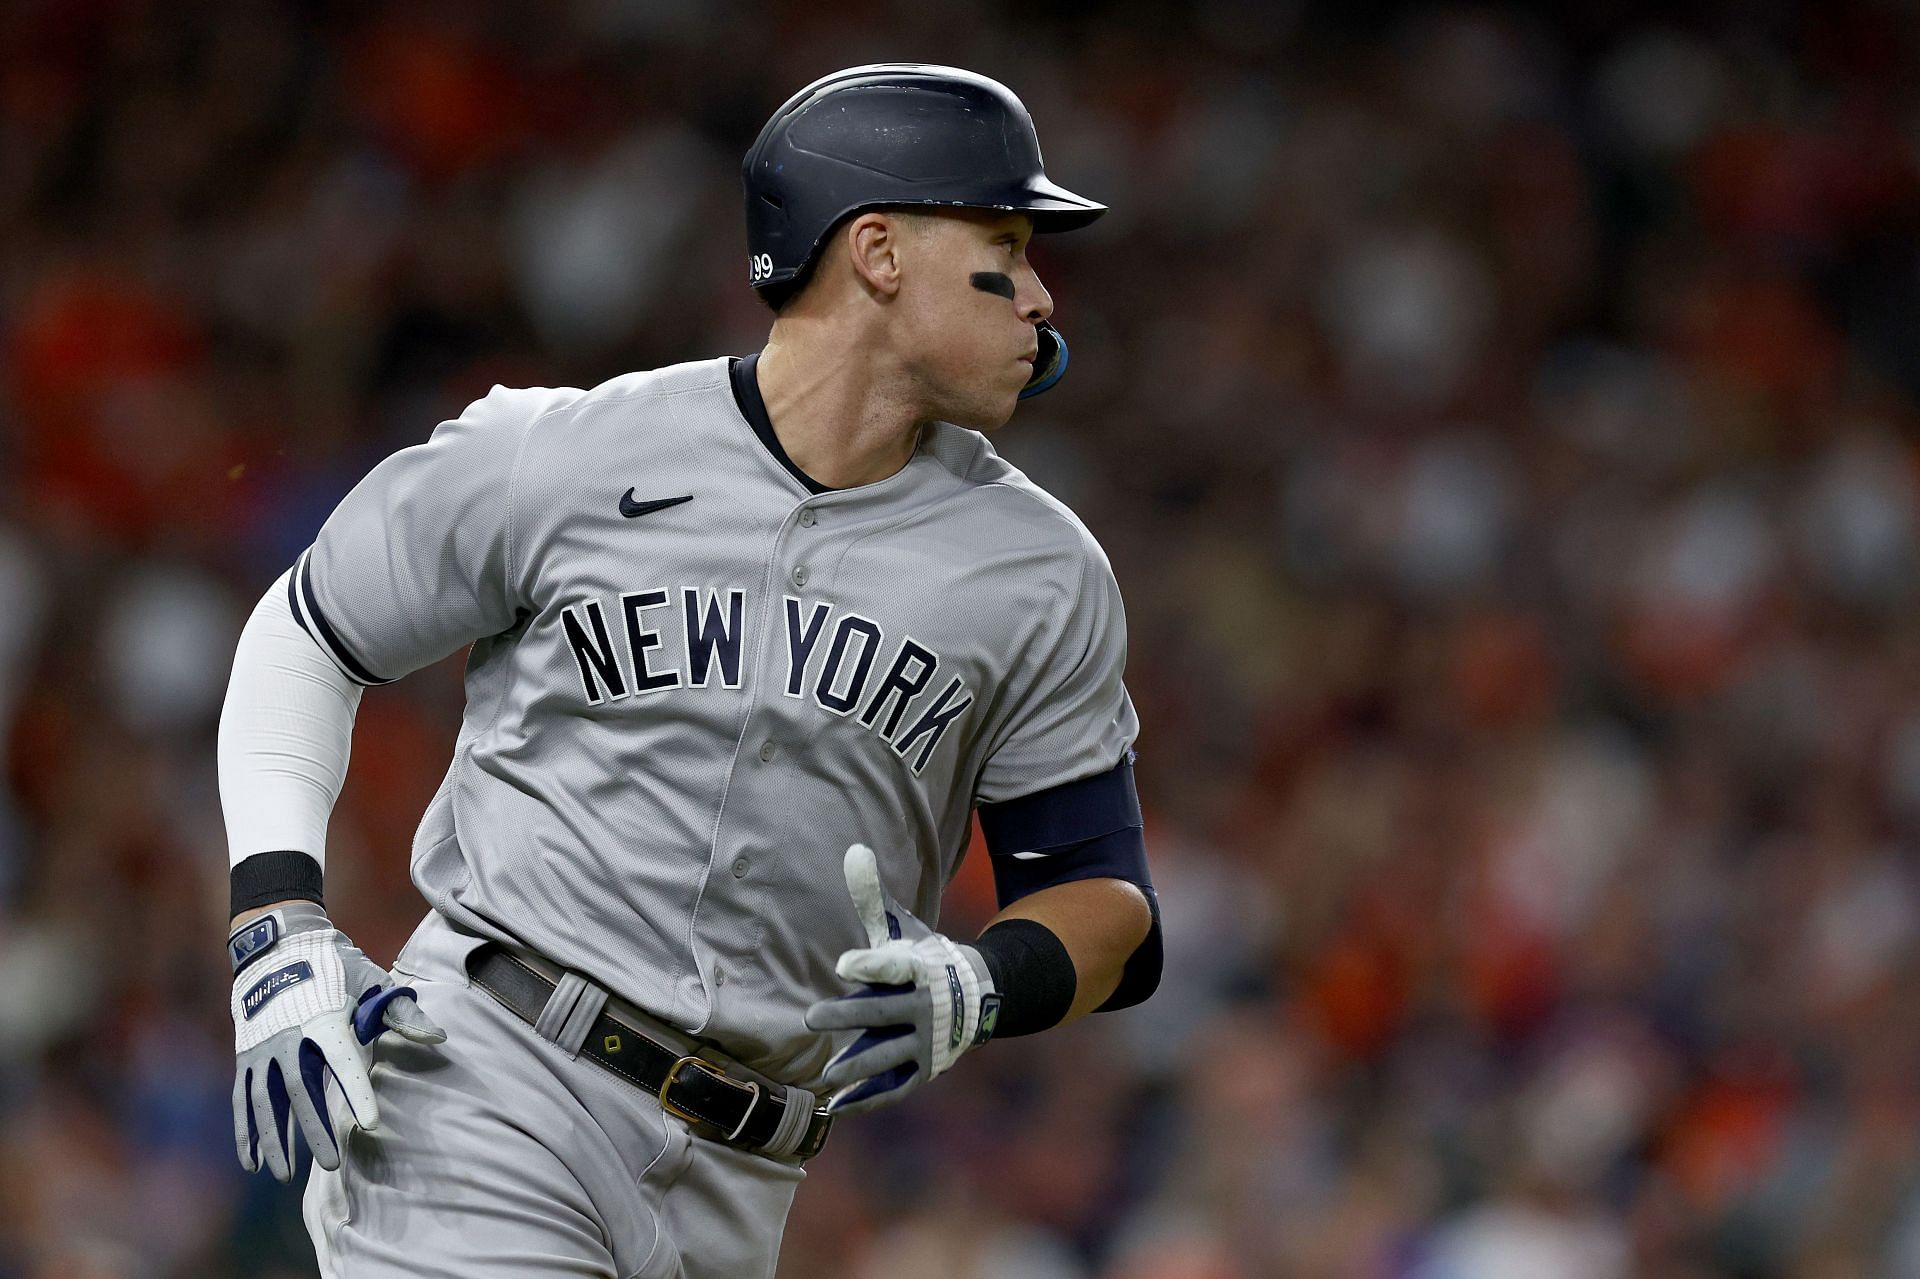 Yankees fan to Aaron Judge: Thank you for everything you've done